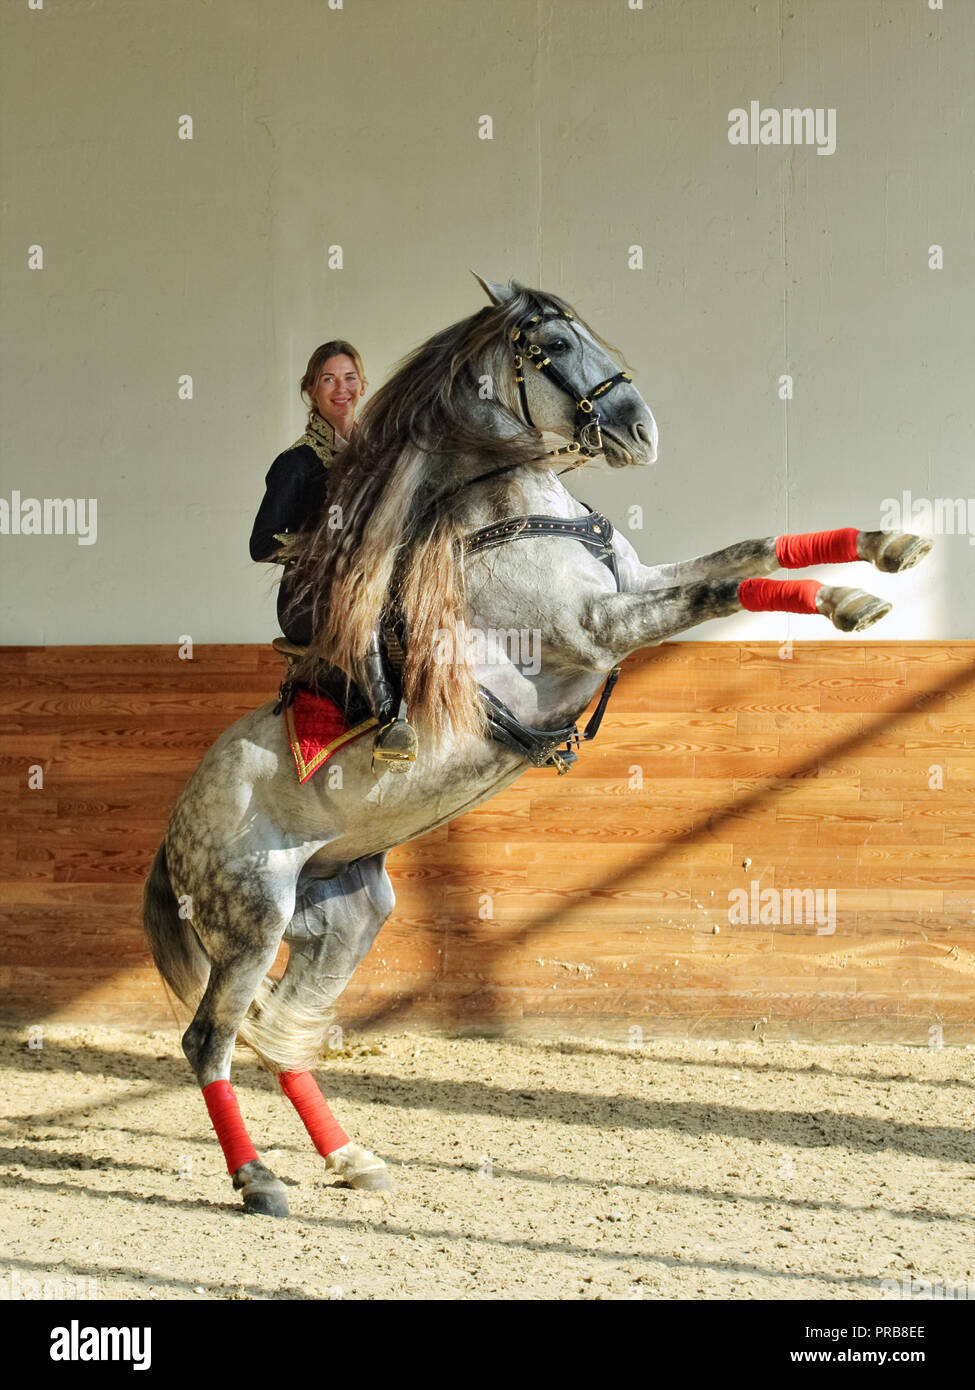 Andalucian stallion rearing up with beauty female rider In traditional matador costume person riding a dapple gray horse Stock Photo